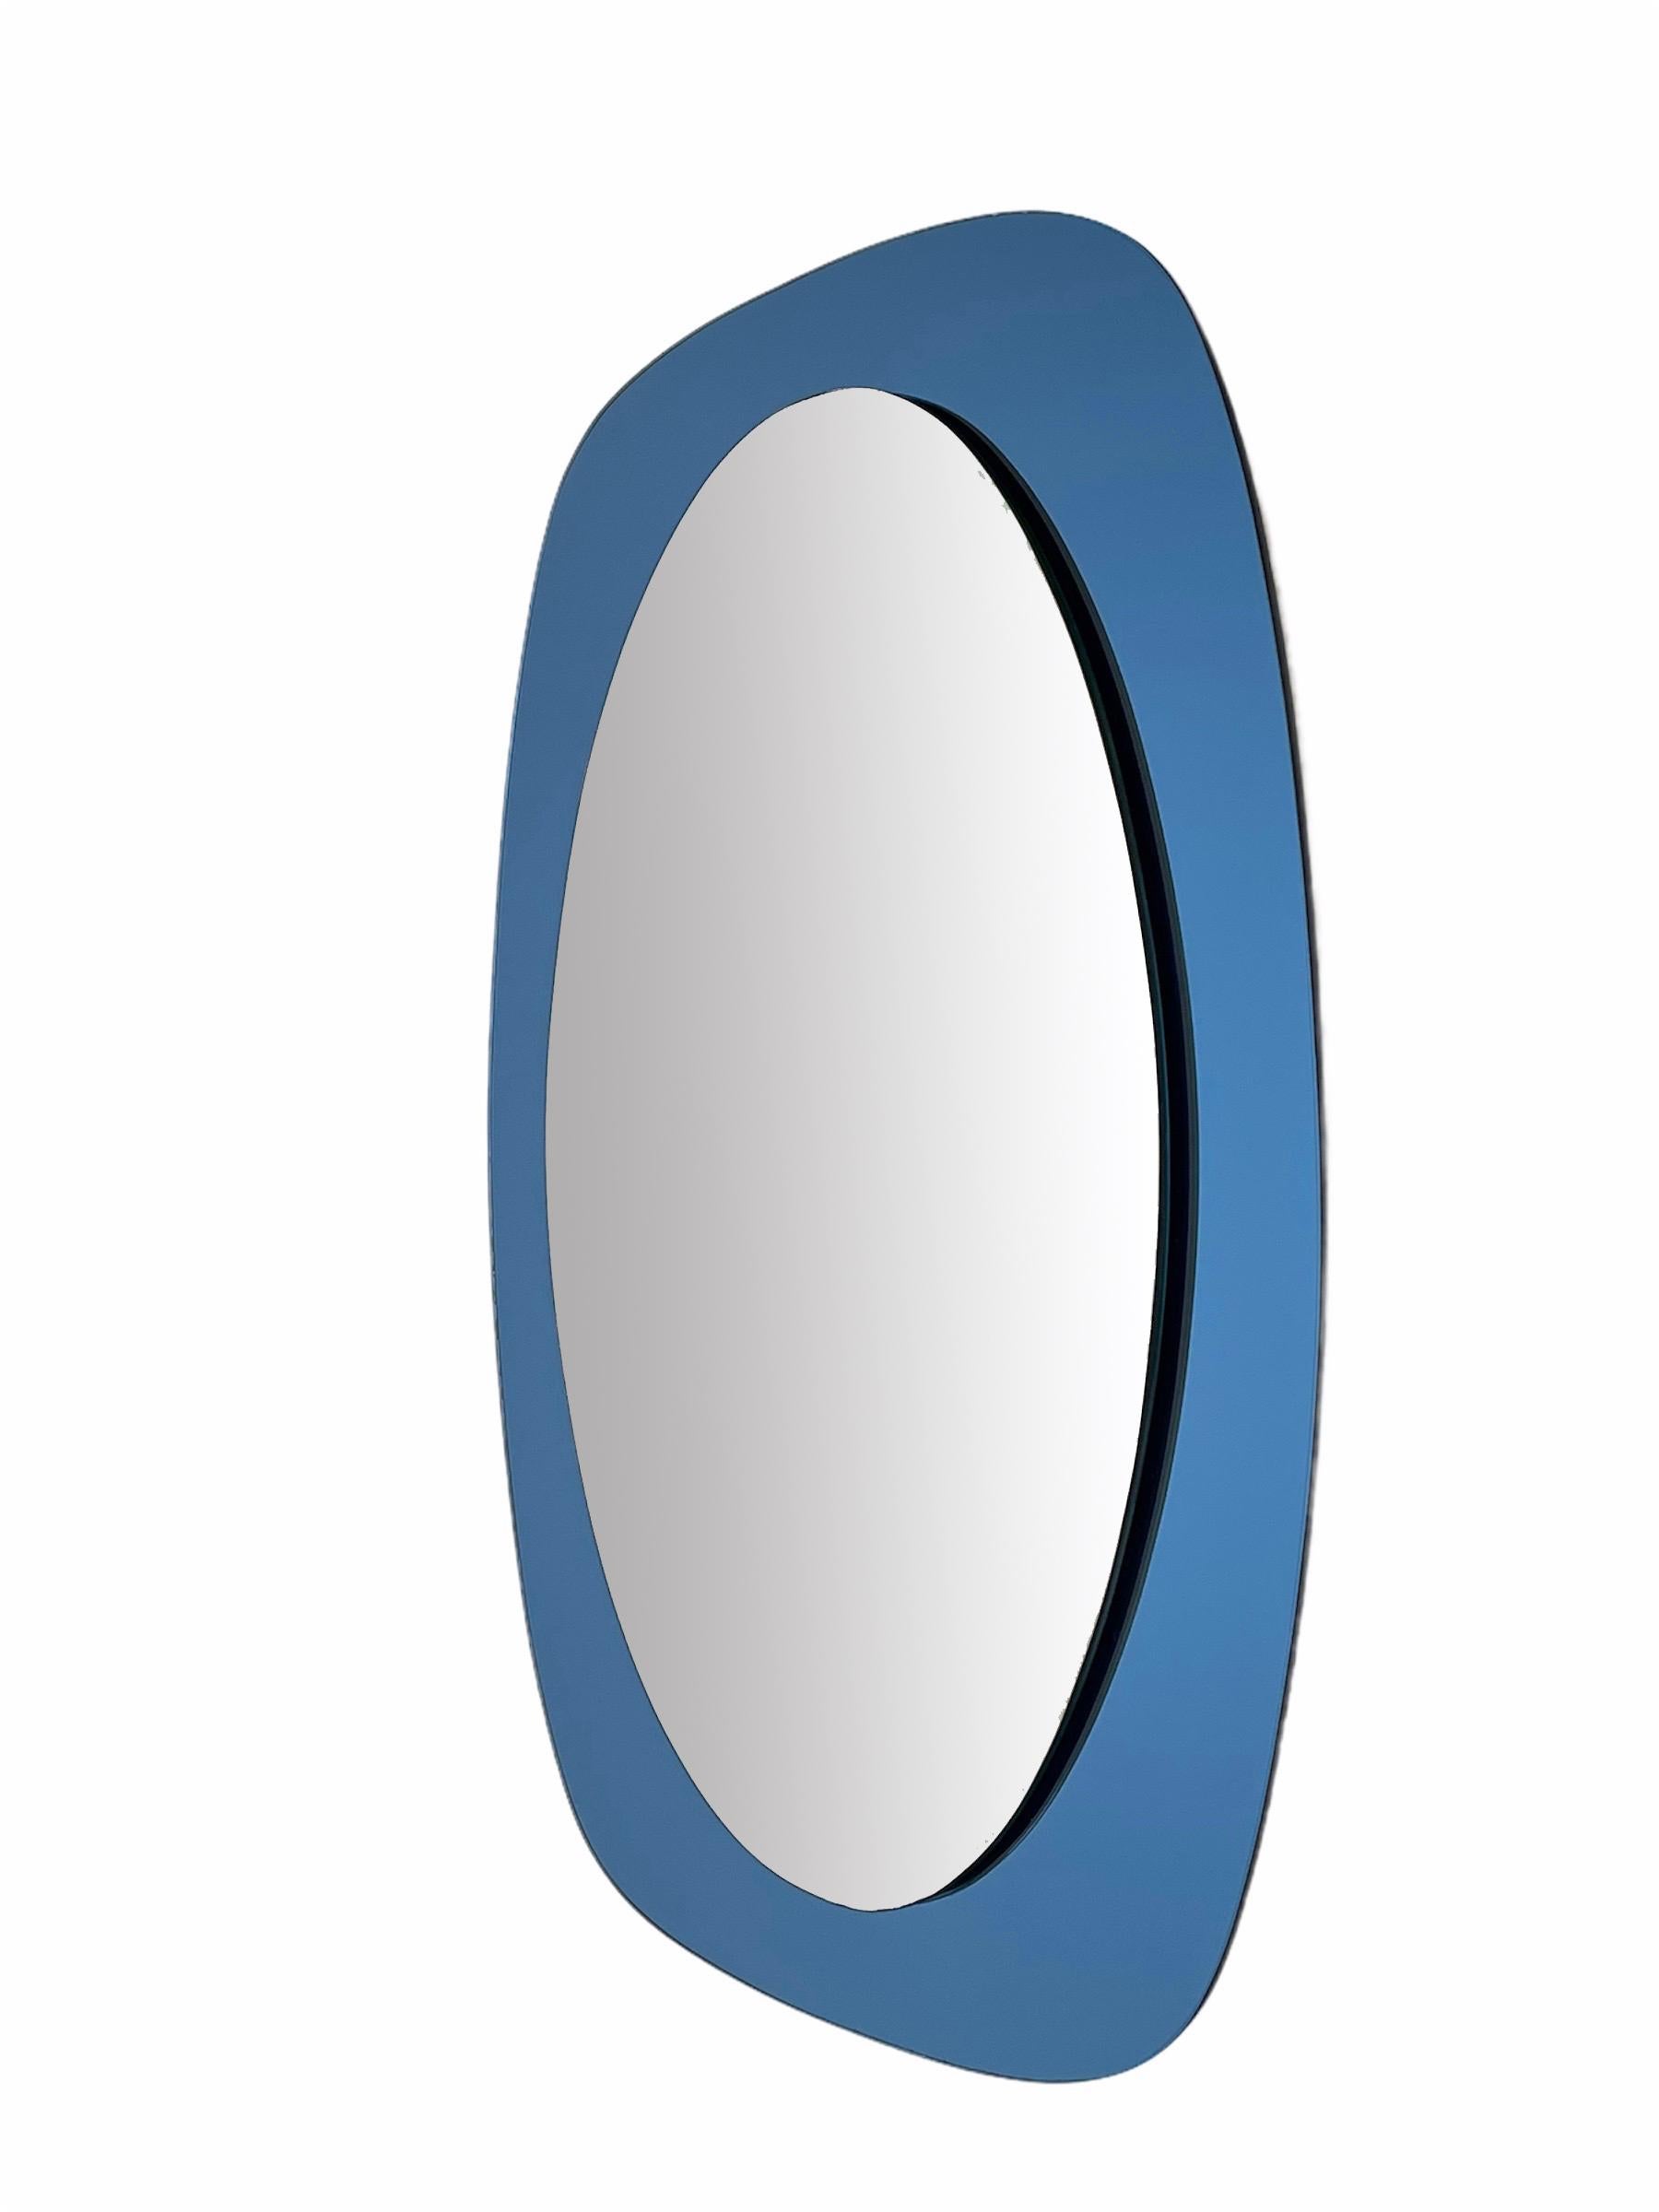 Cristal Art Midcentury Oval Italian Wall Mirror with Blue Glass Frame, 1960s 2